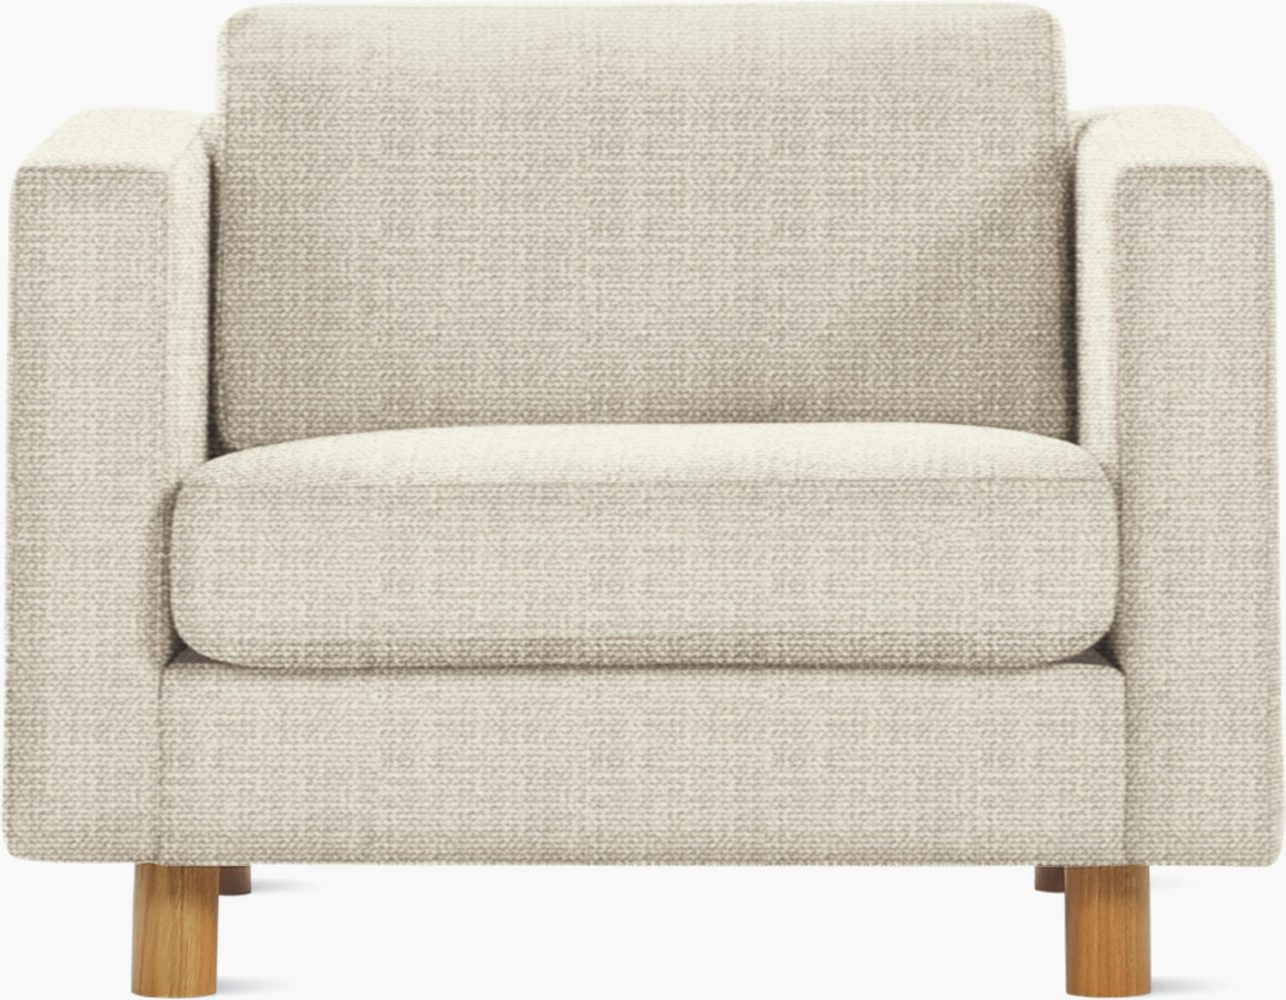 The Most Comfortable Accent Chair Options for Home Decor - Bob Vila